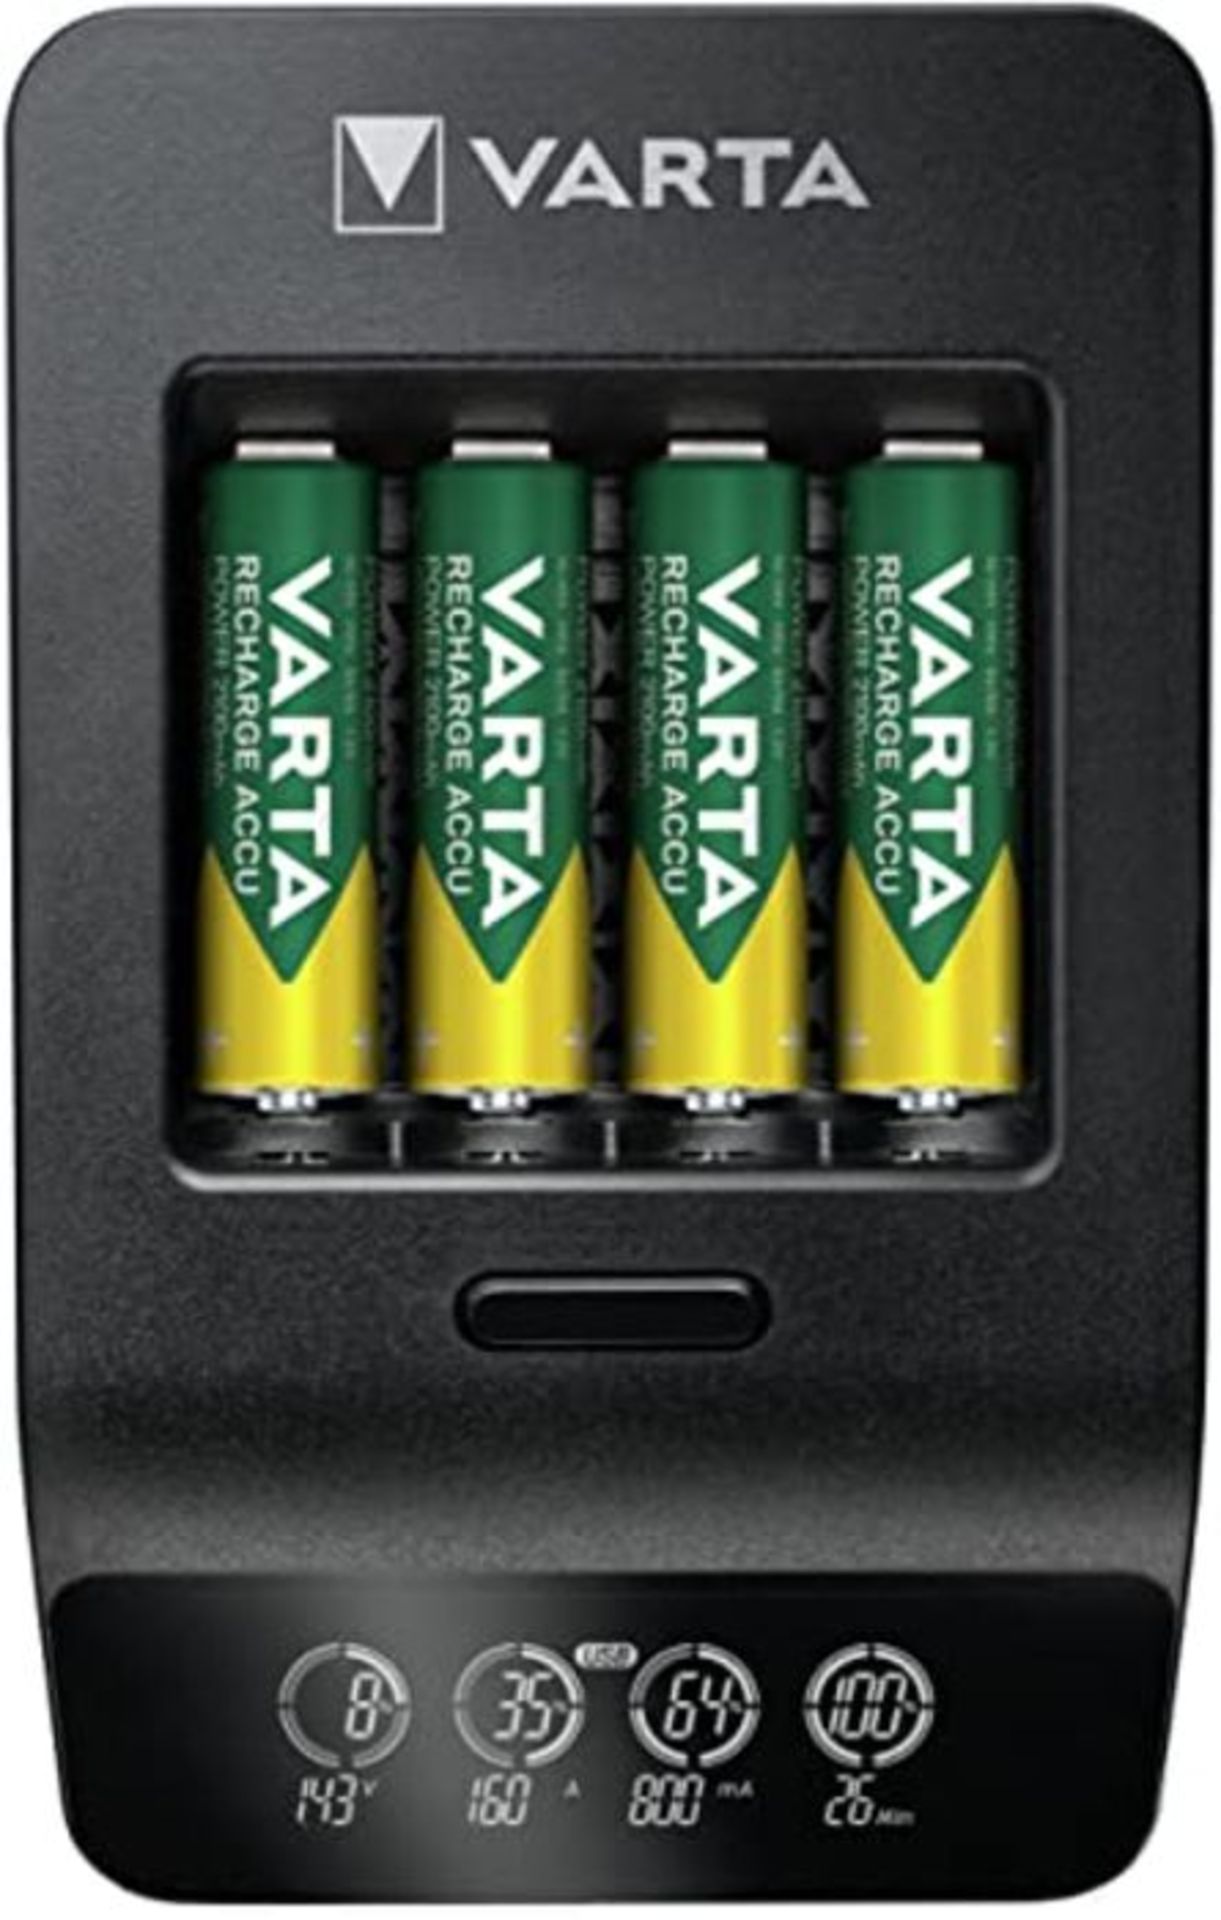 VARTA Smart Charger+ for AA/AAA, single bay charge, detection of defective cells, incl